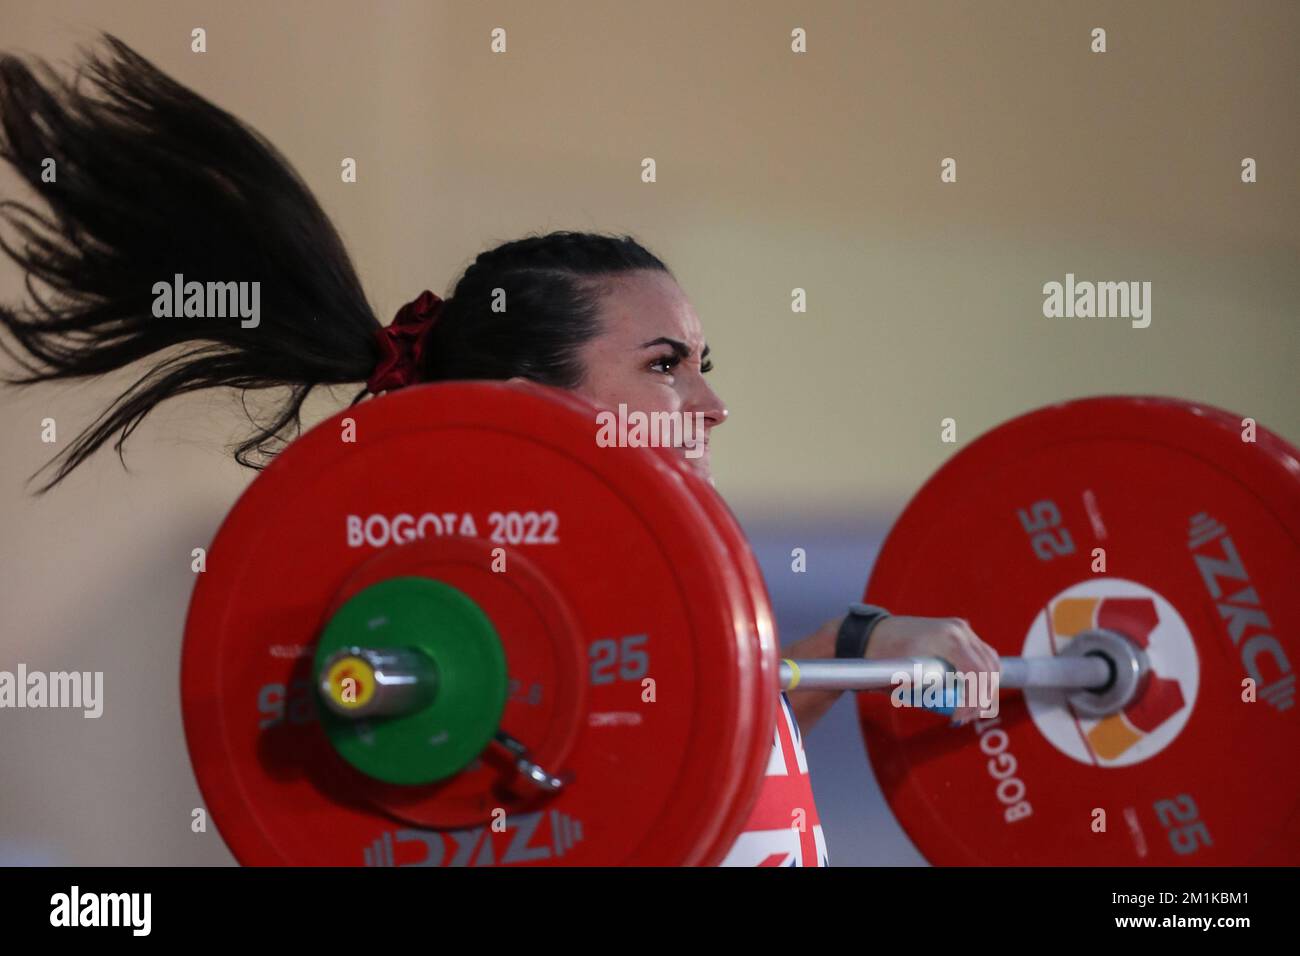 Bogota, Colombia. 12th Dec, 2022. Sarah Davies of Britain competes during the women's 71kg event at the 2022 World Weightlifting Championships held in Bogota, Colombia, Dec. 12, 2022. Credit: Wang Tiancong/Xinhua/Alamy Live News Stock Photo